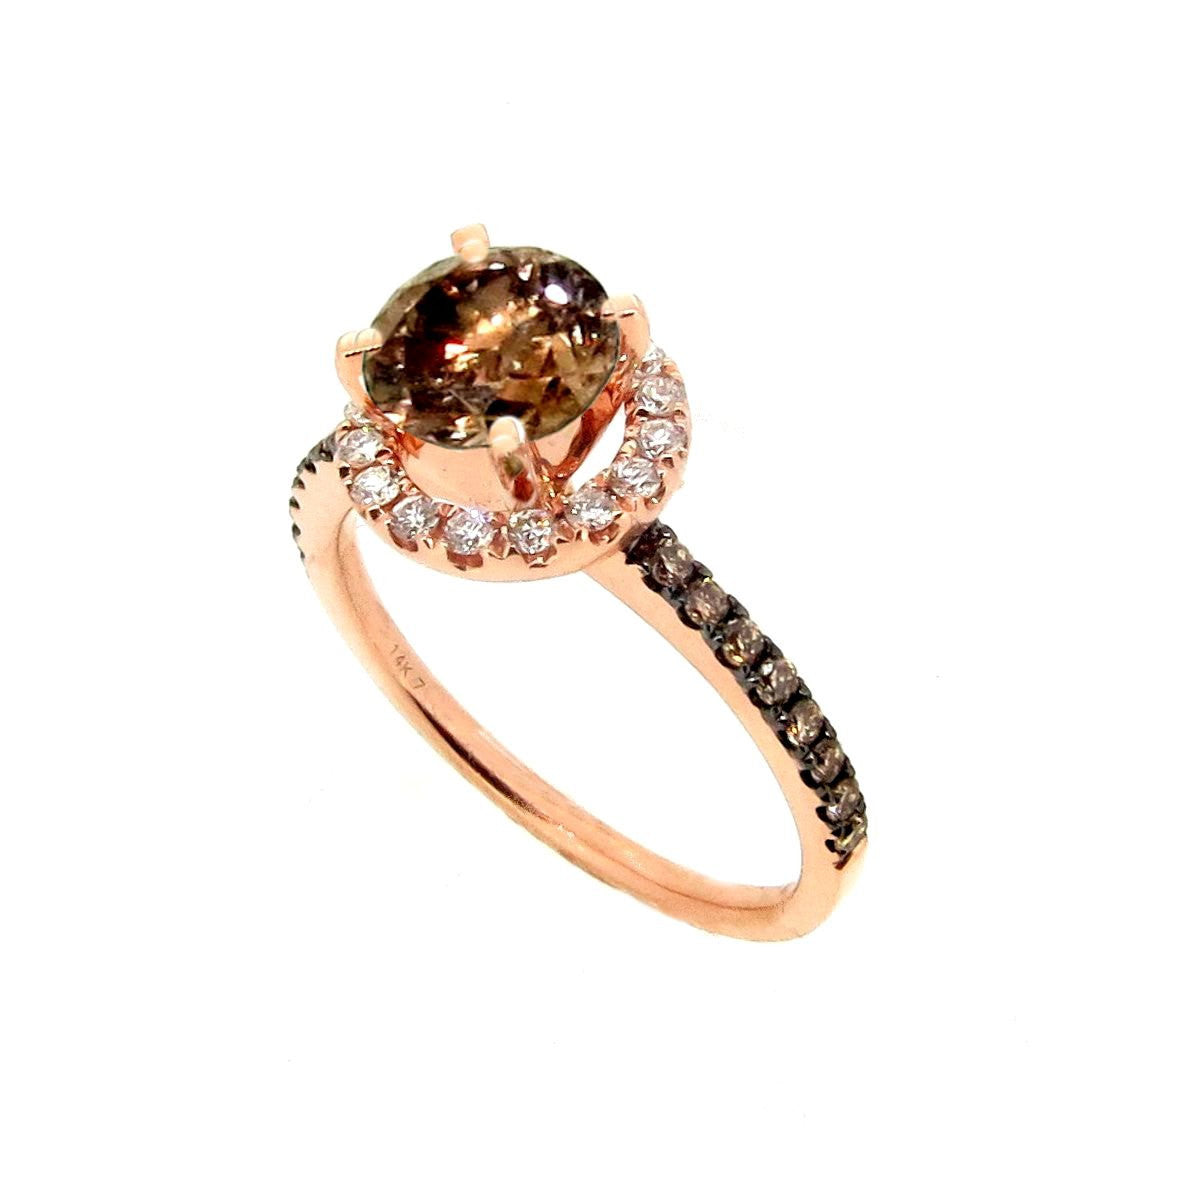 1 Carat Fancy Brown Smoky Quartz Halo, White Diamond Accent Stones, Rose Gold, Engagement Ring, Anniversary Ring - SQ94639A